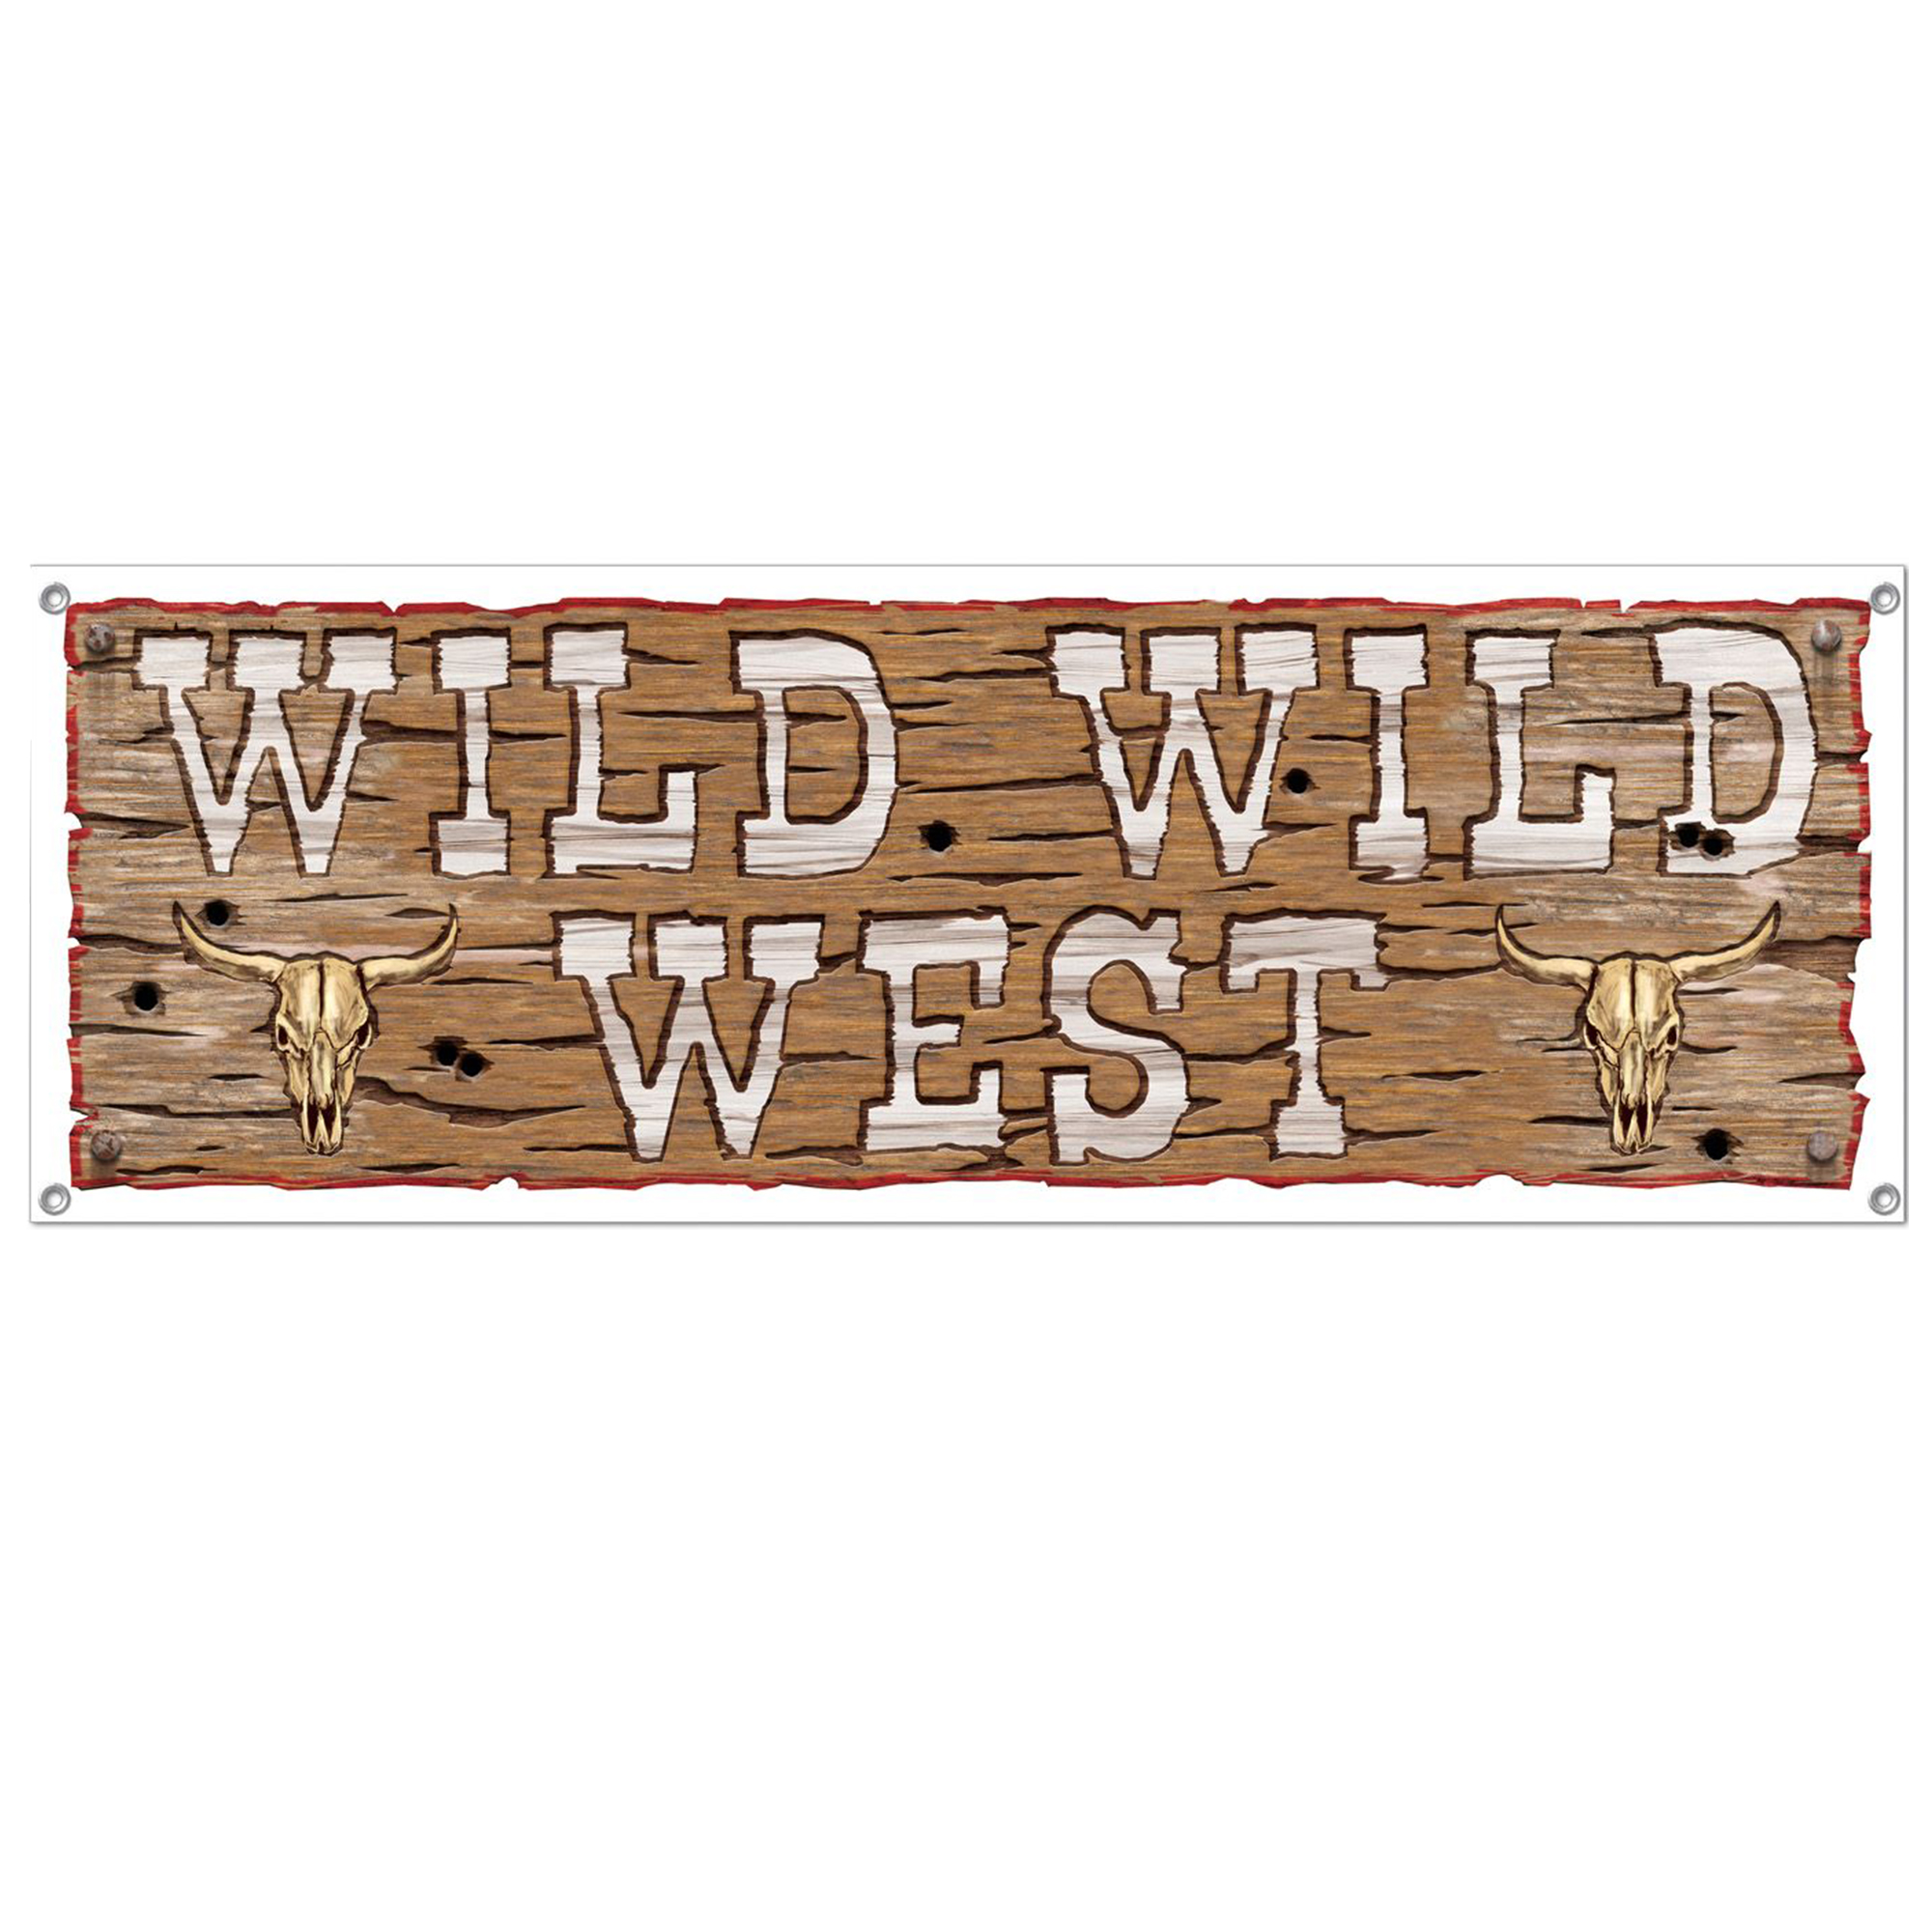 Wild West Sign Banner Decoration by Windy City Novelties